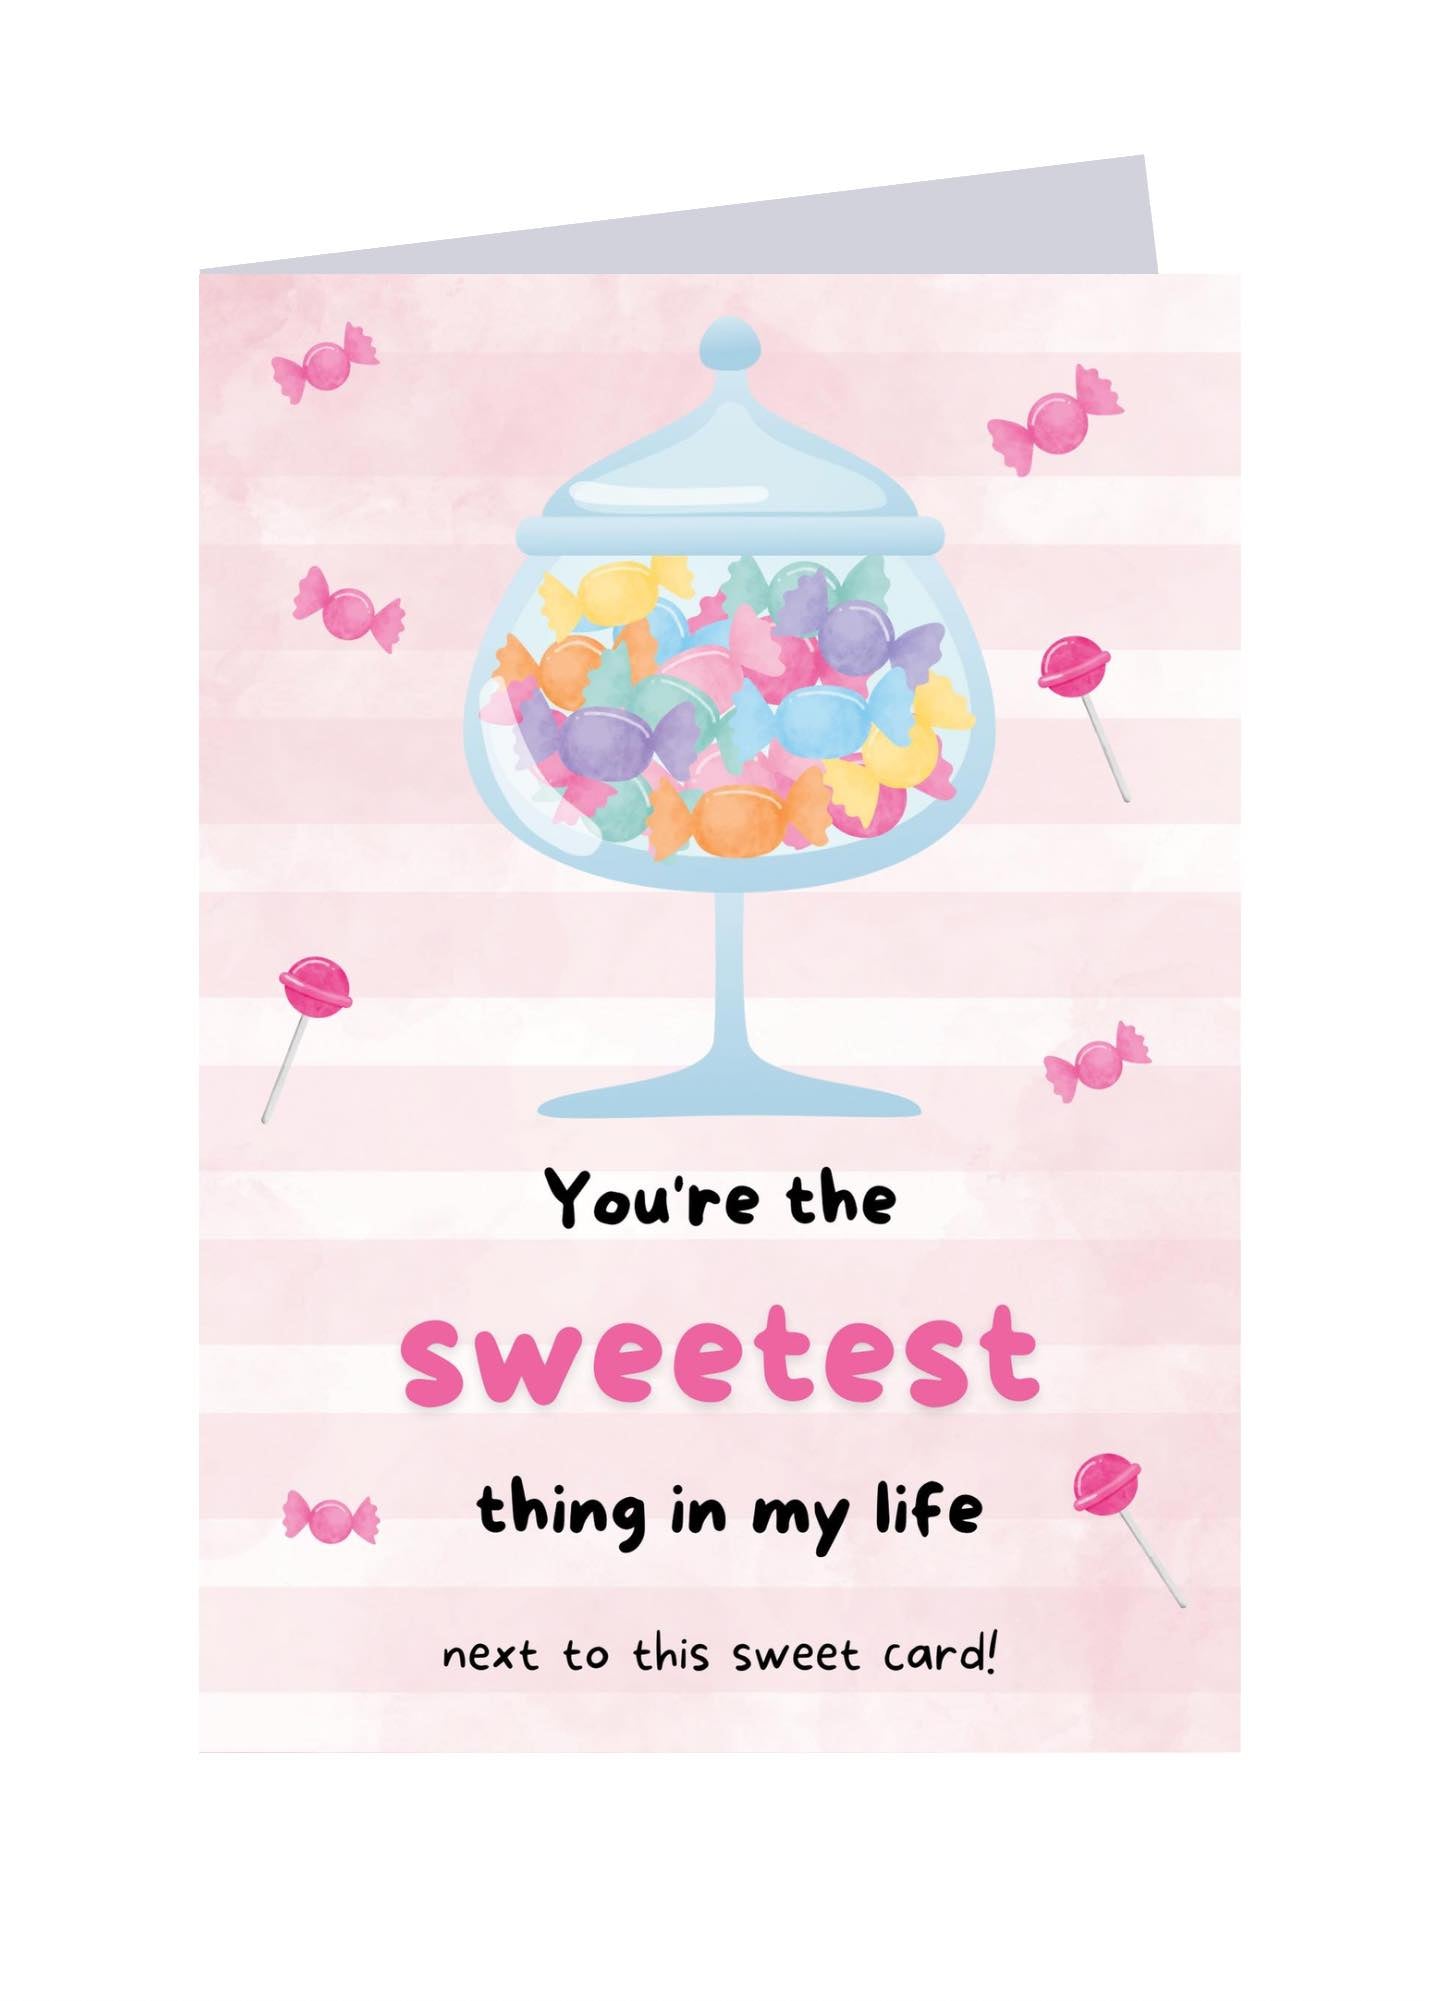 You're the Sweetest!